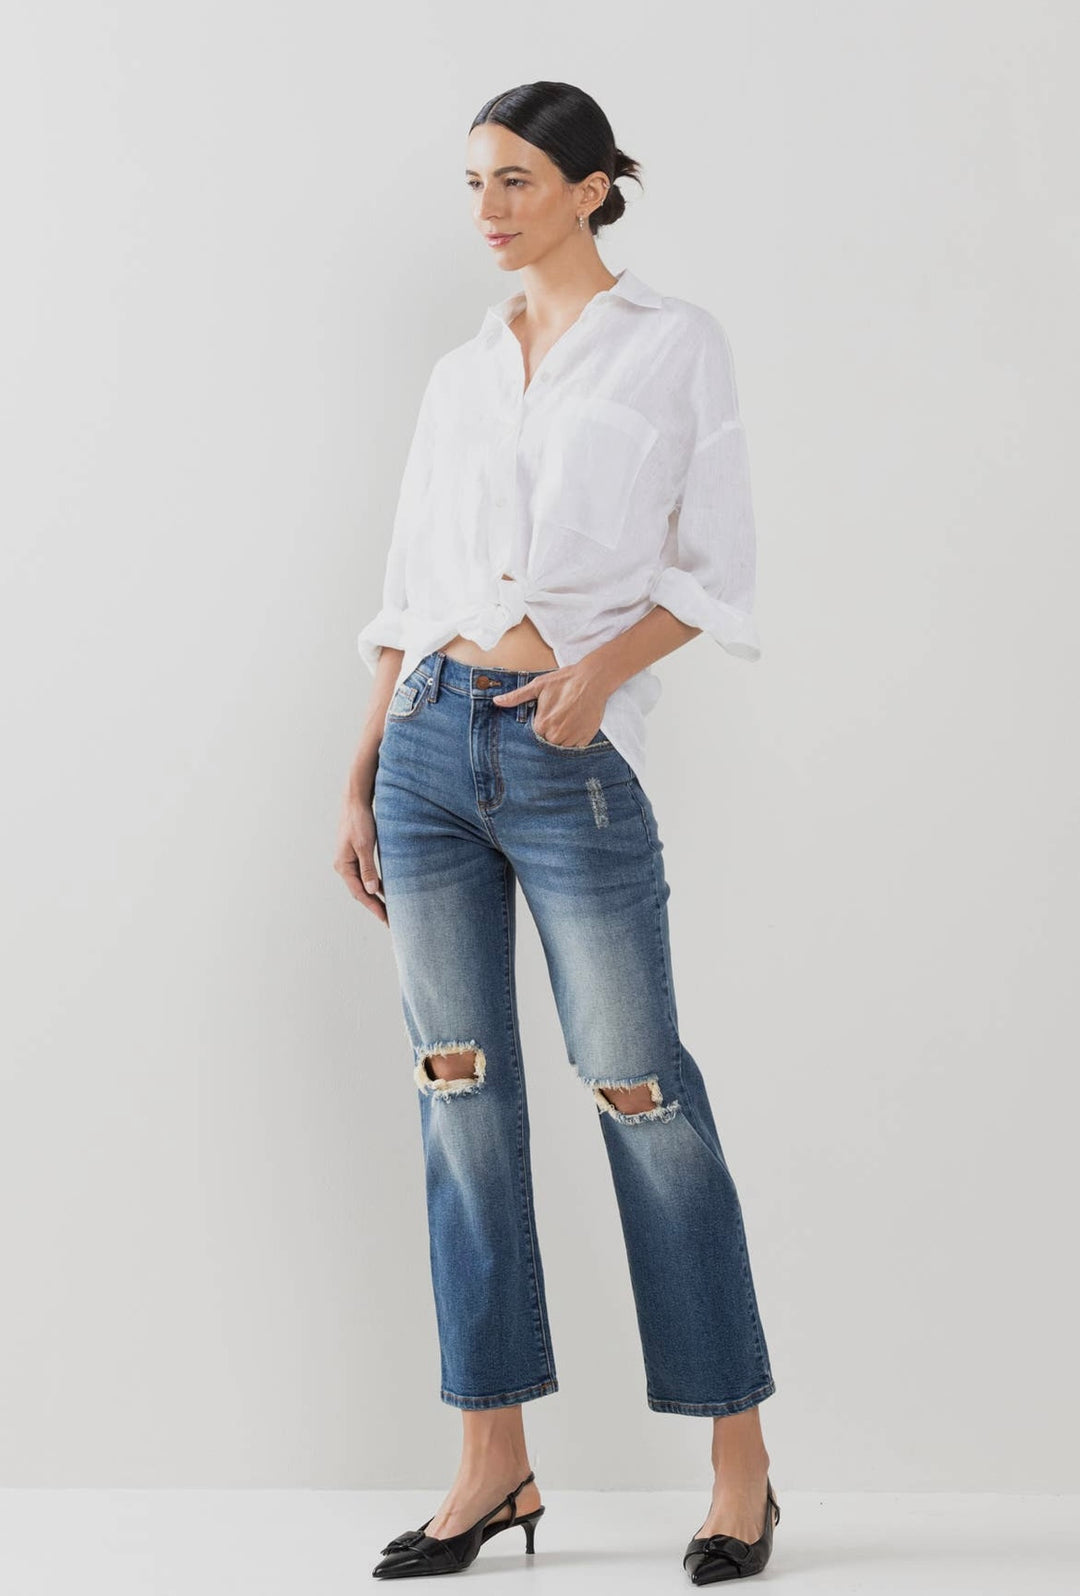 Love, Need and Want You LaBelle Vintage Jeans